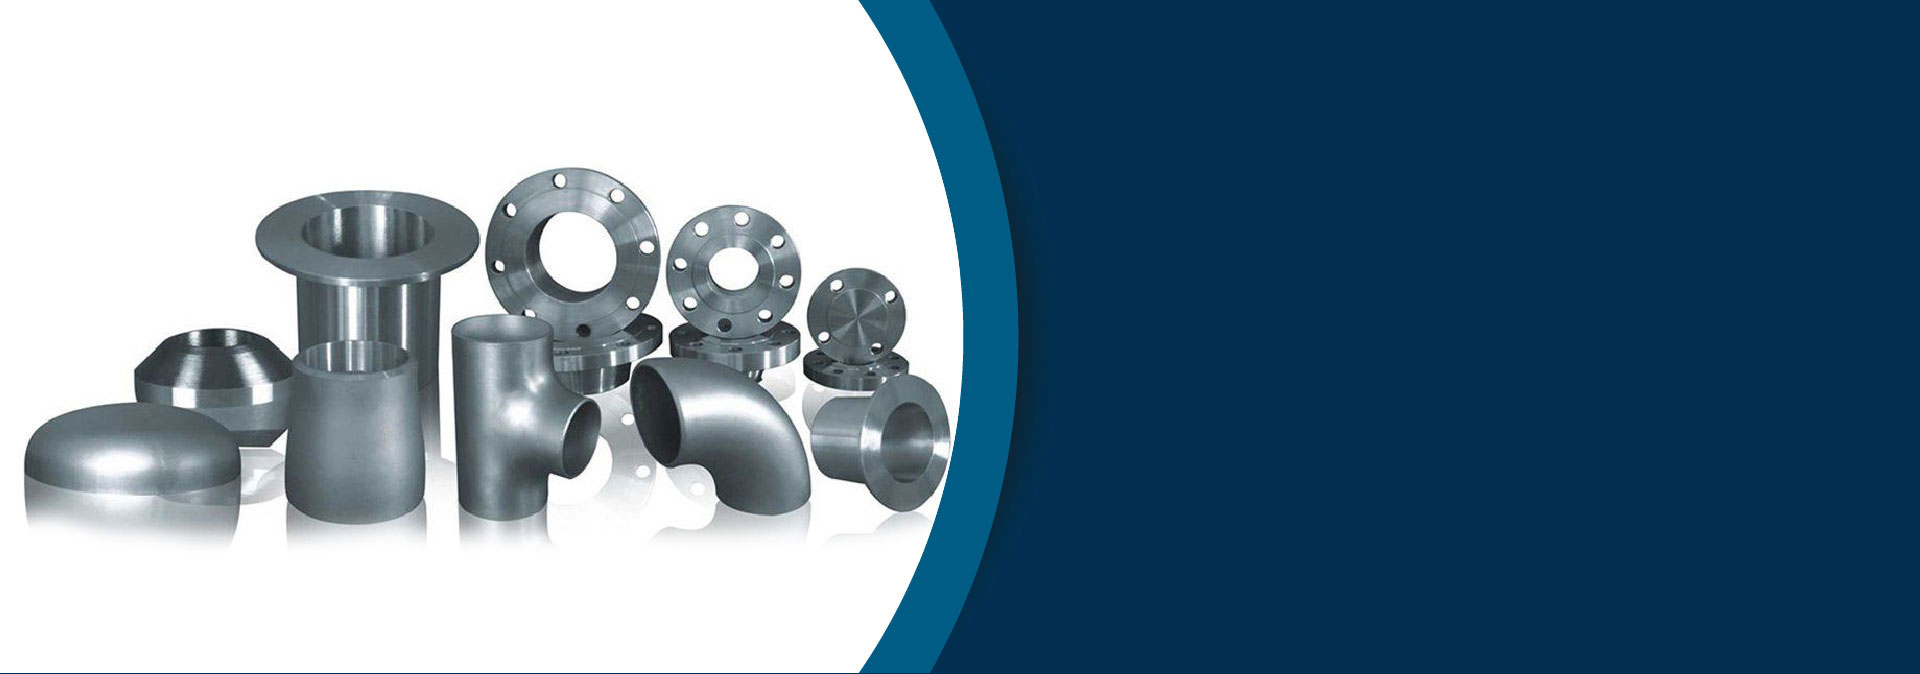 Renowned Manufacturer & Stockist of Flanges & Pipe Fittings.